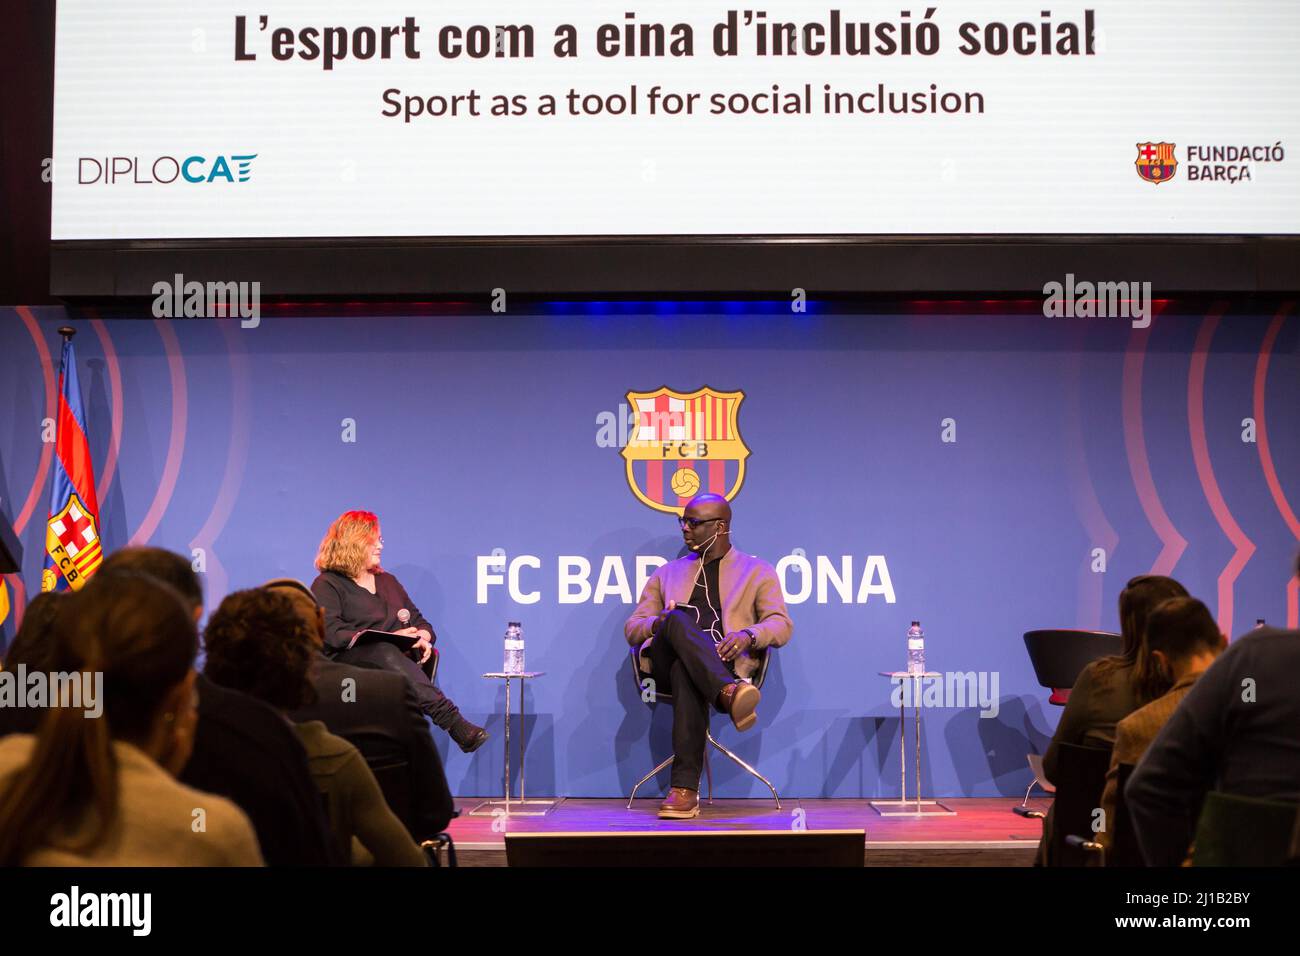 Lilian Thuram (C), former FC Barcelona player and founder of the Lilian Thuram Foundation for Education against Racism is seen speaking with Rita Marzoa (L), journalist and moderator of the FC Barcelona event, 'Sport as a tool for social inclusion”. The Public Diplomacy Council of Catalonia, DIPLOCAT and the FC Barcelona Foundation have organized an event on sport as a tool for social inclusion, being opened with a talk with Lilian Thuram, former French FC Barcelona player and creator of the Lilian Thuram Foundation for Education against Racism, who spoke about education and racism in the cont Stock Photo